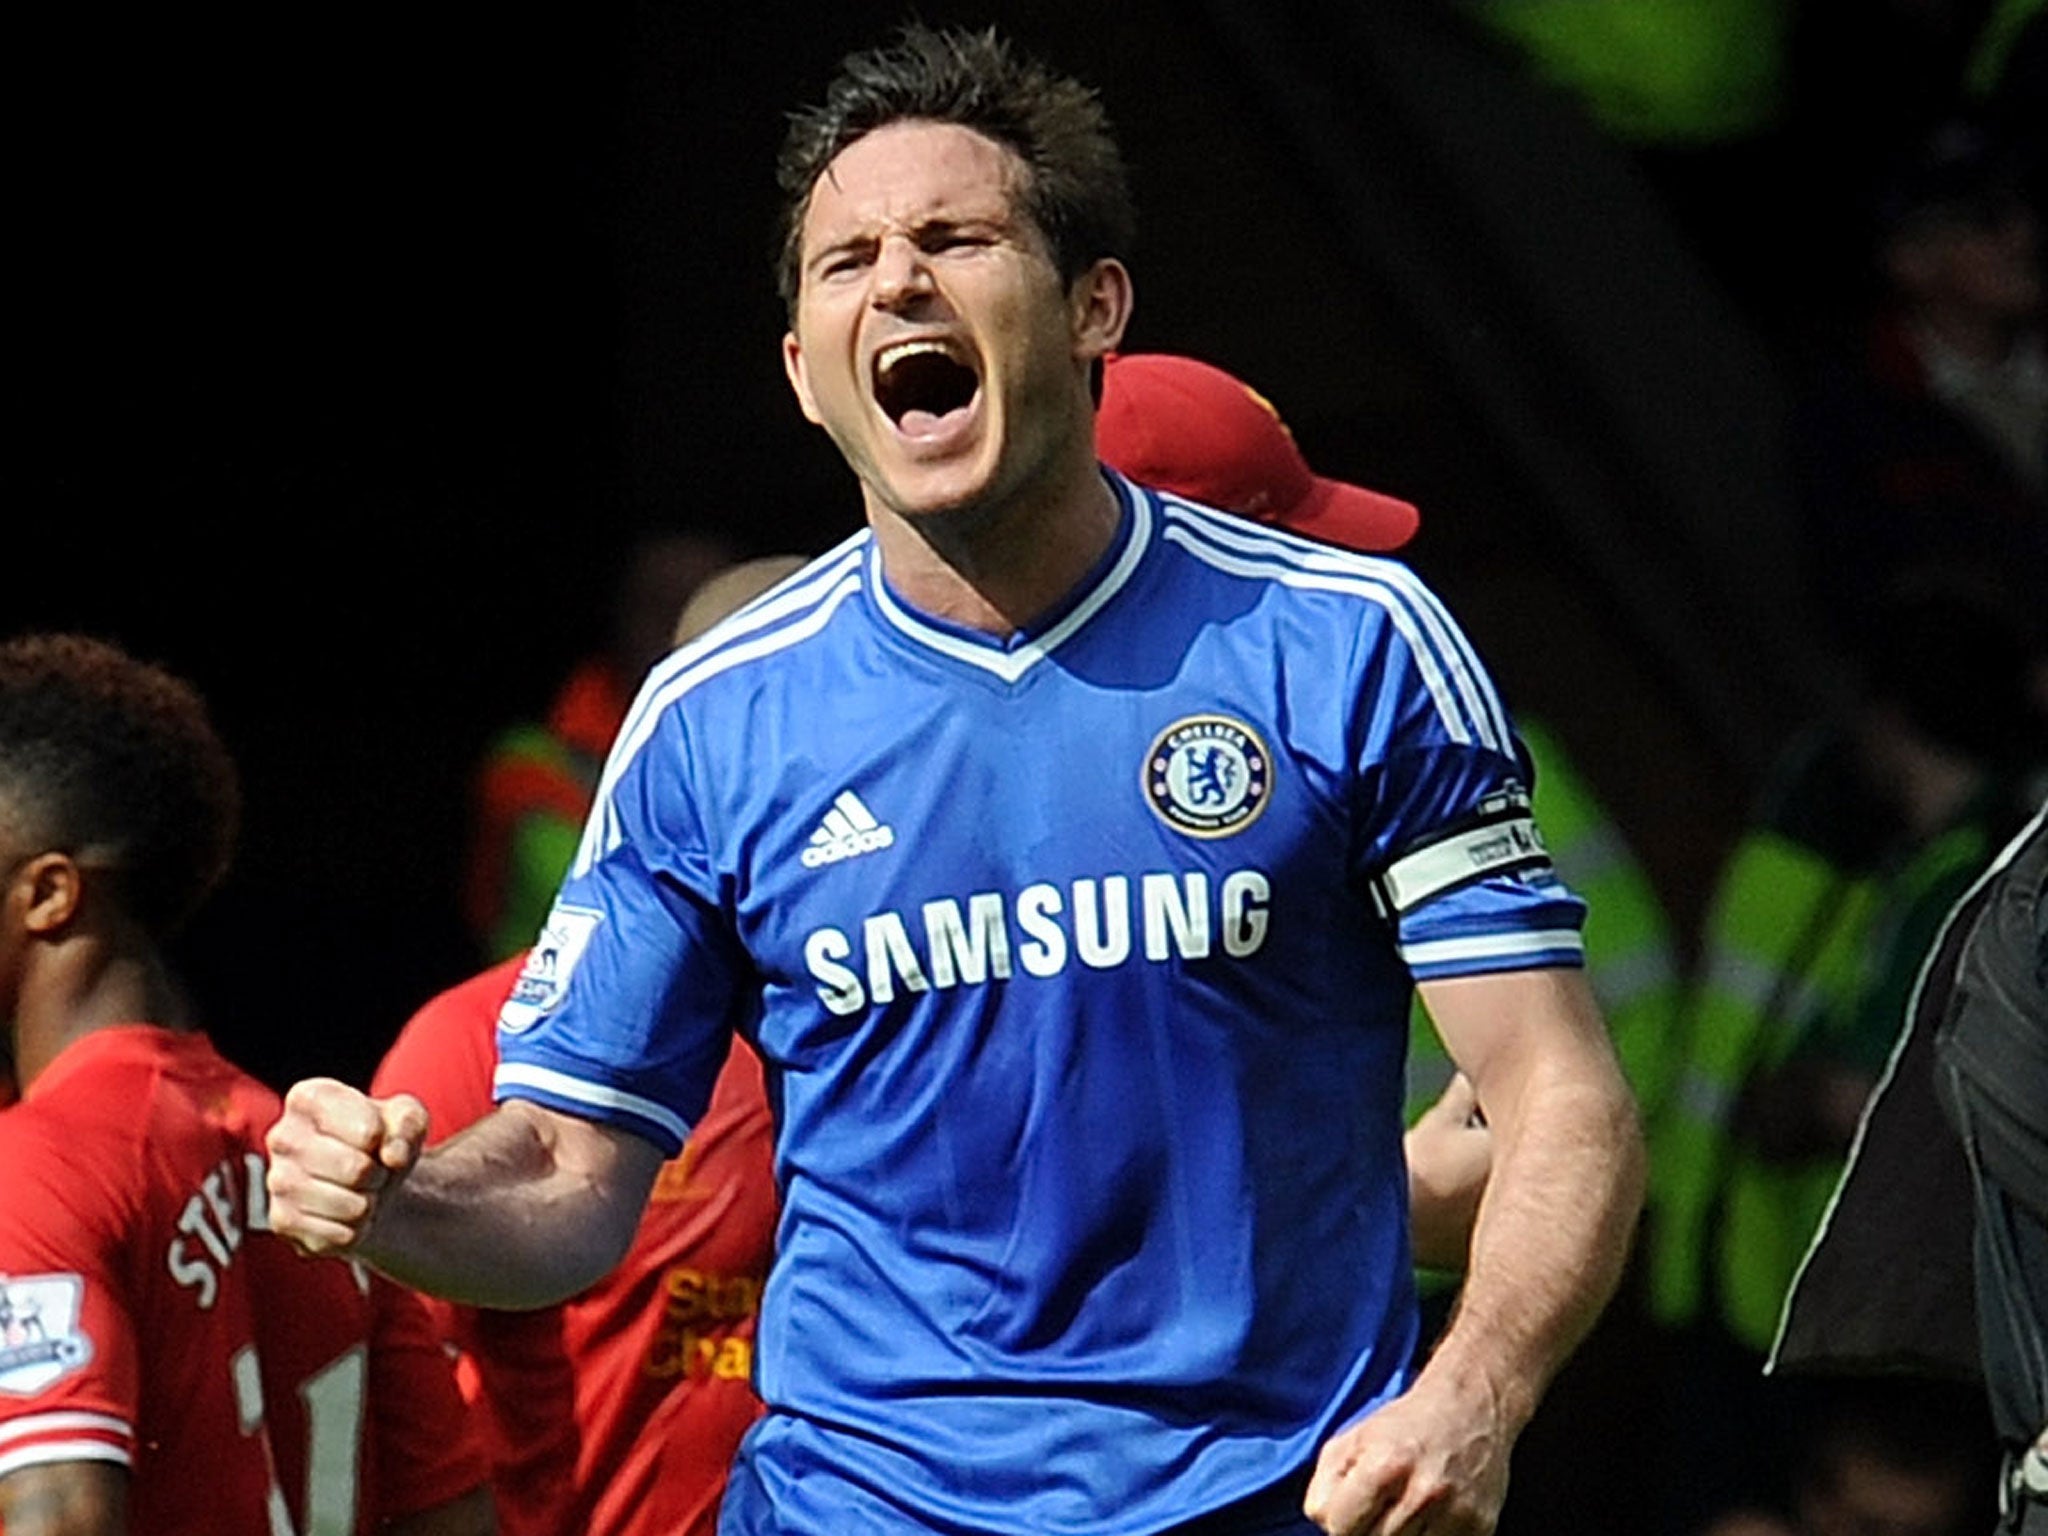 Frank Lampard has announced he will be leaving Chelsea